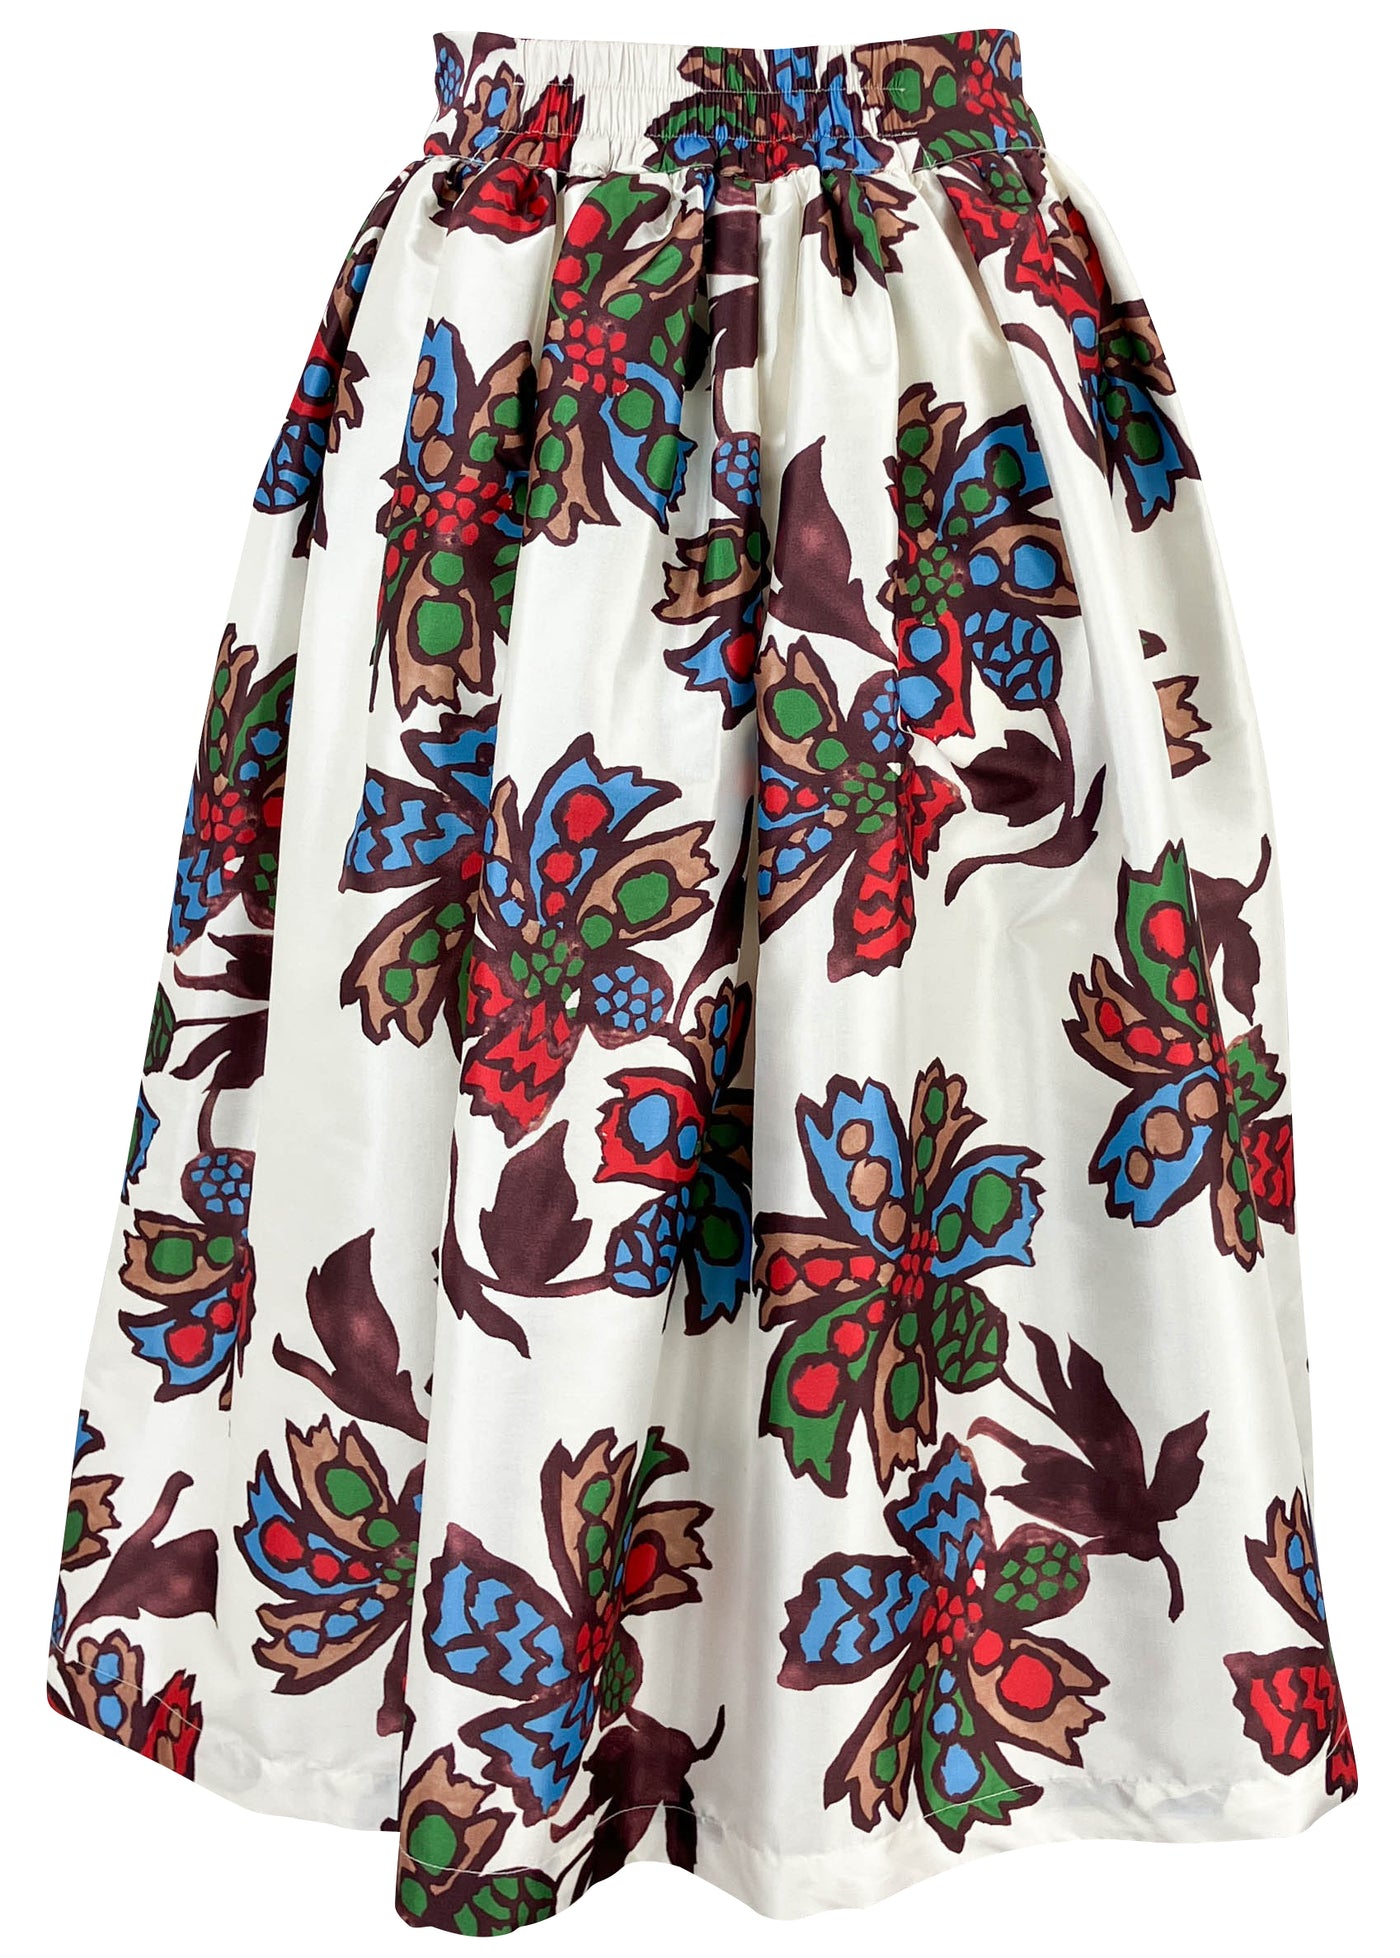 Frances Valentine Barbara Mid Skirt in Oyster - Discounts on Frances Valentine at UAL